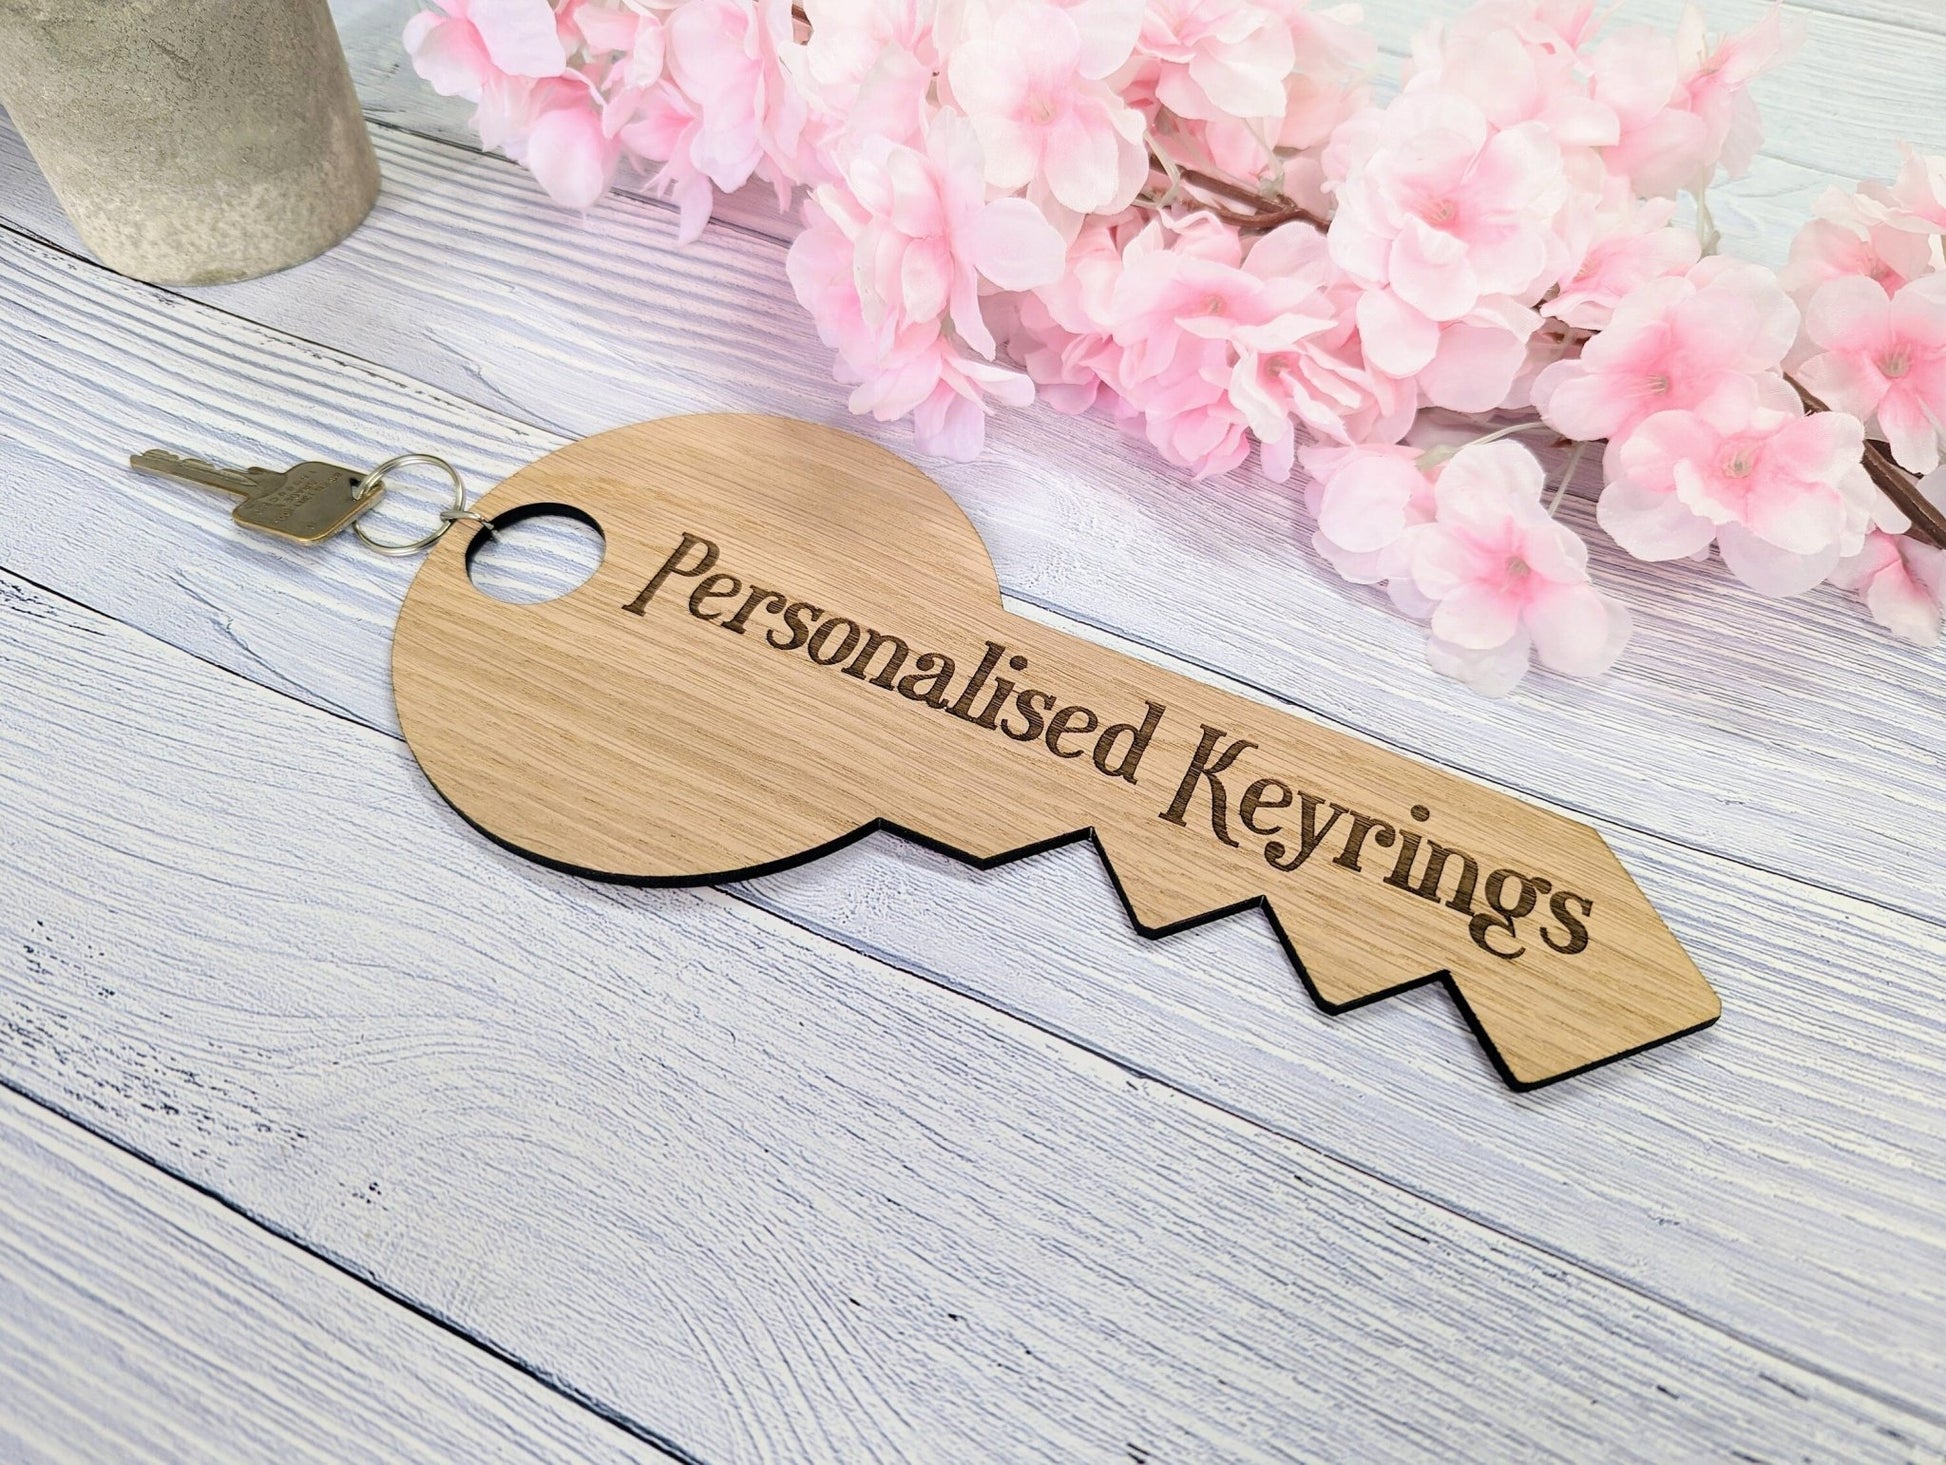 Oversized Key-Shaped Wooden Keyring - 297x138mm - Custom Engraved Text - Perfect for Special Events or Unique Gifts - CherryGroveCraft